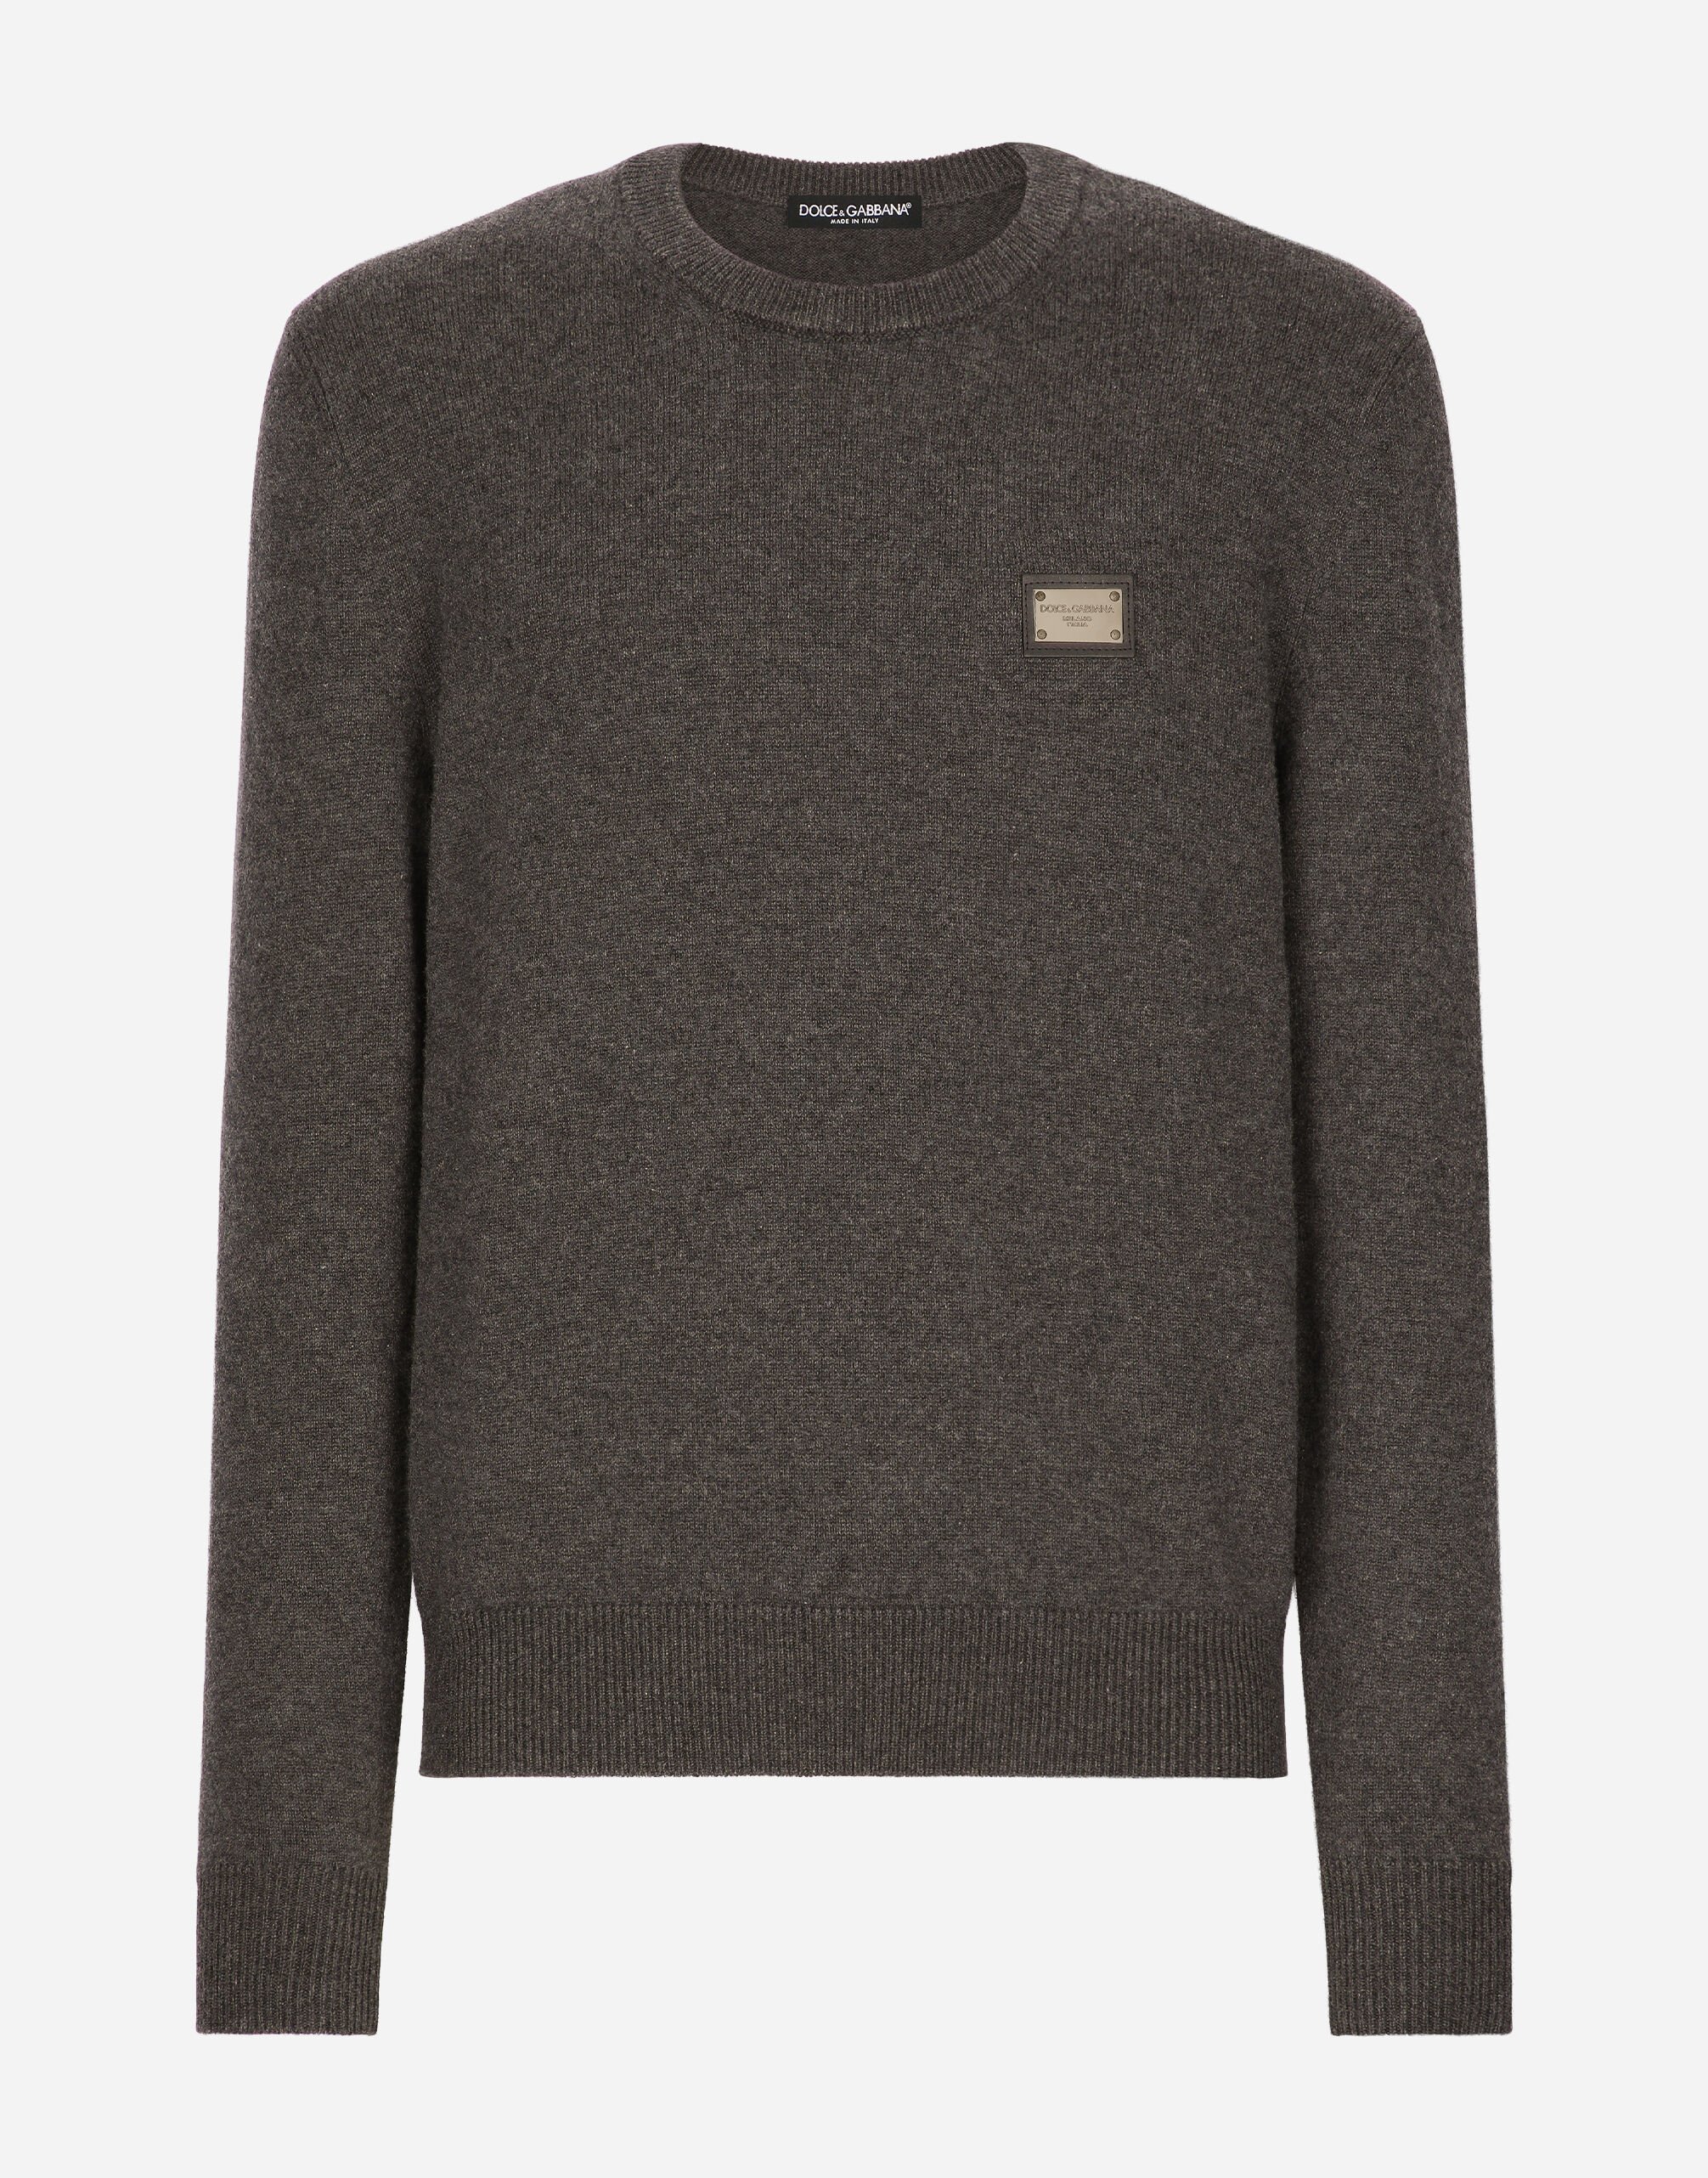 Dolce & Gabbana Wool round-neck sweater with branded tag Grey GXP80TJFMK7